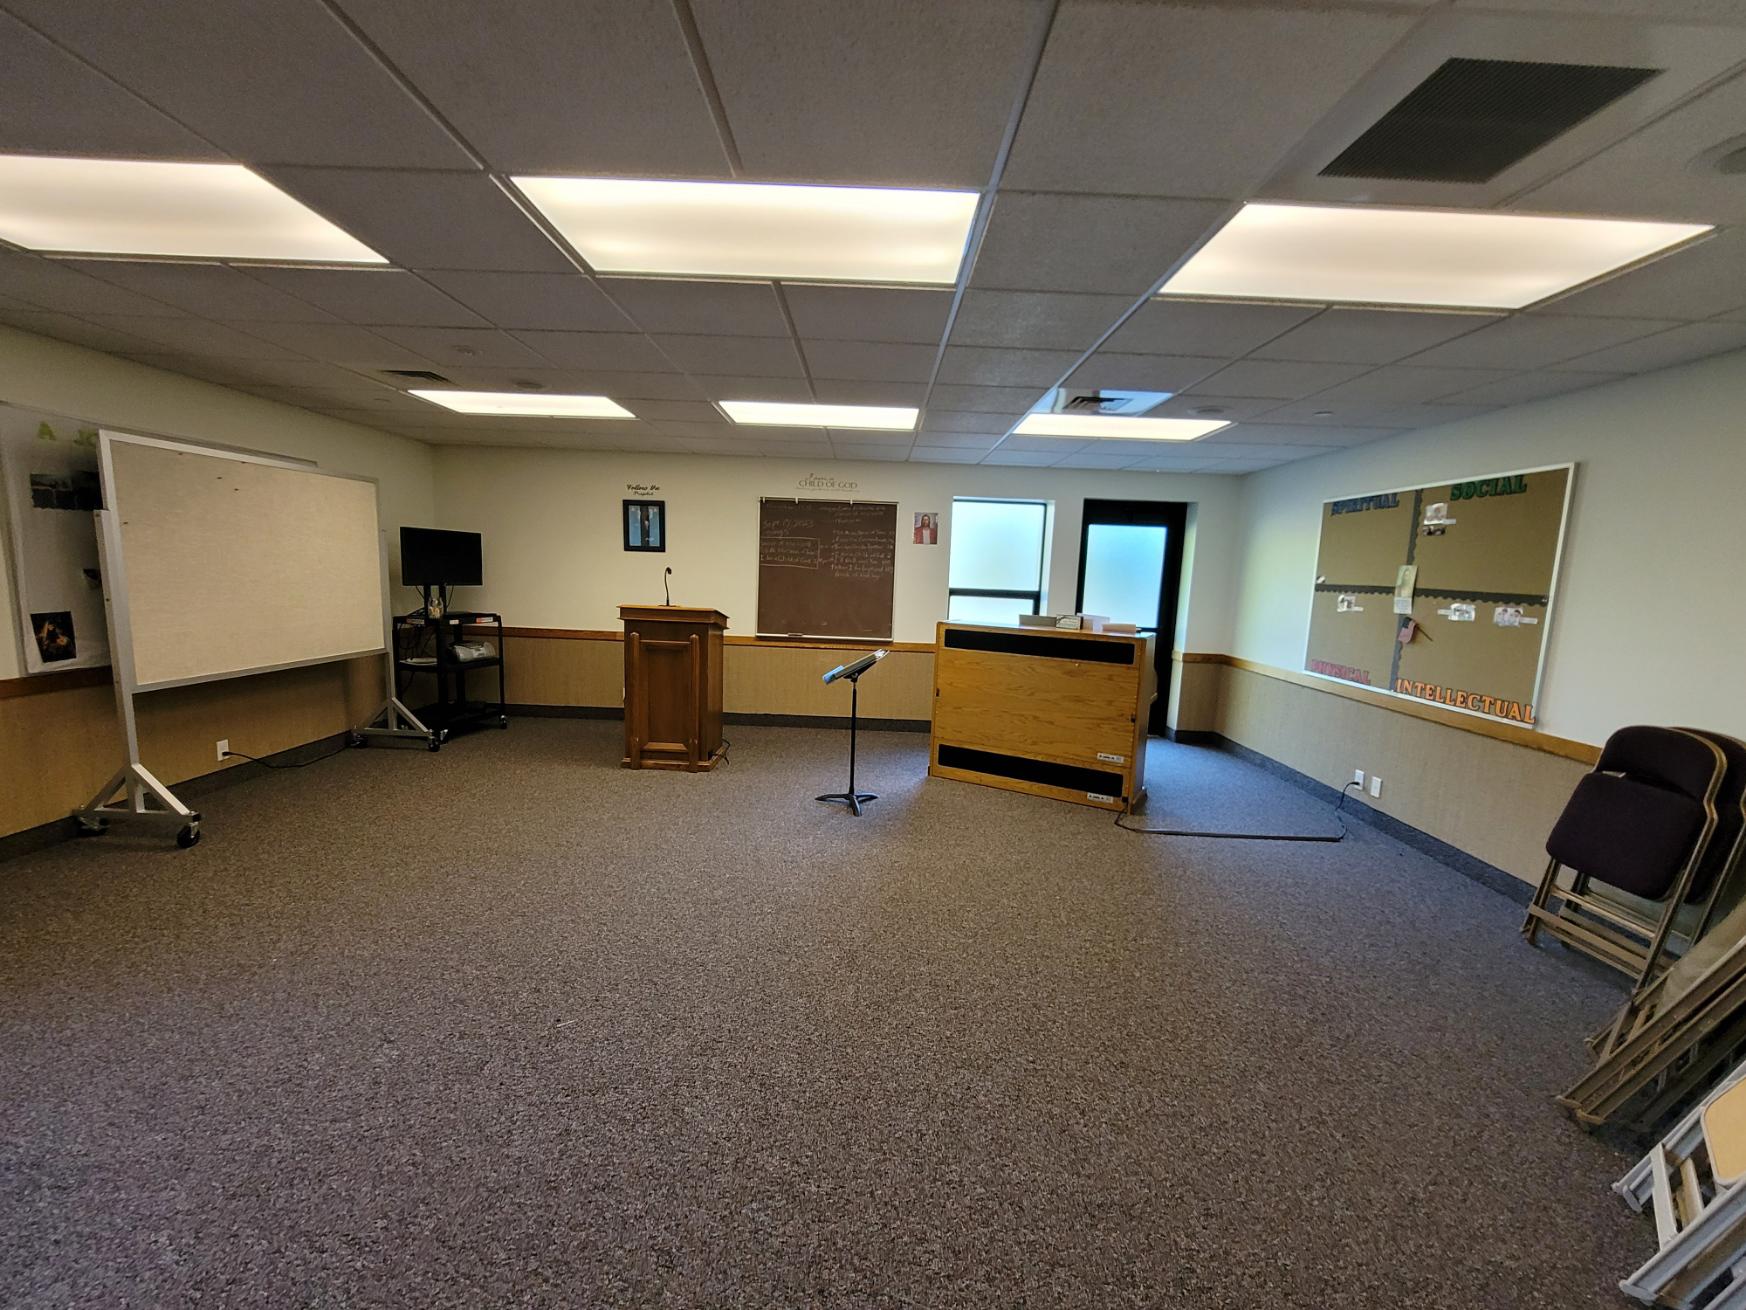 Primary classroom, for children, at  The Church of Jesus Christ of Latter-day Saints